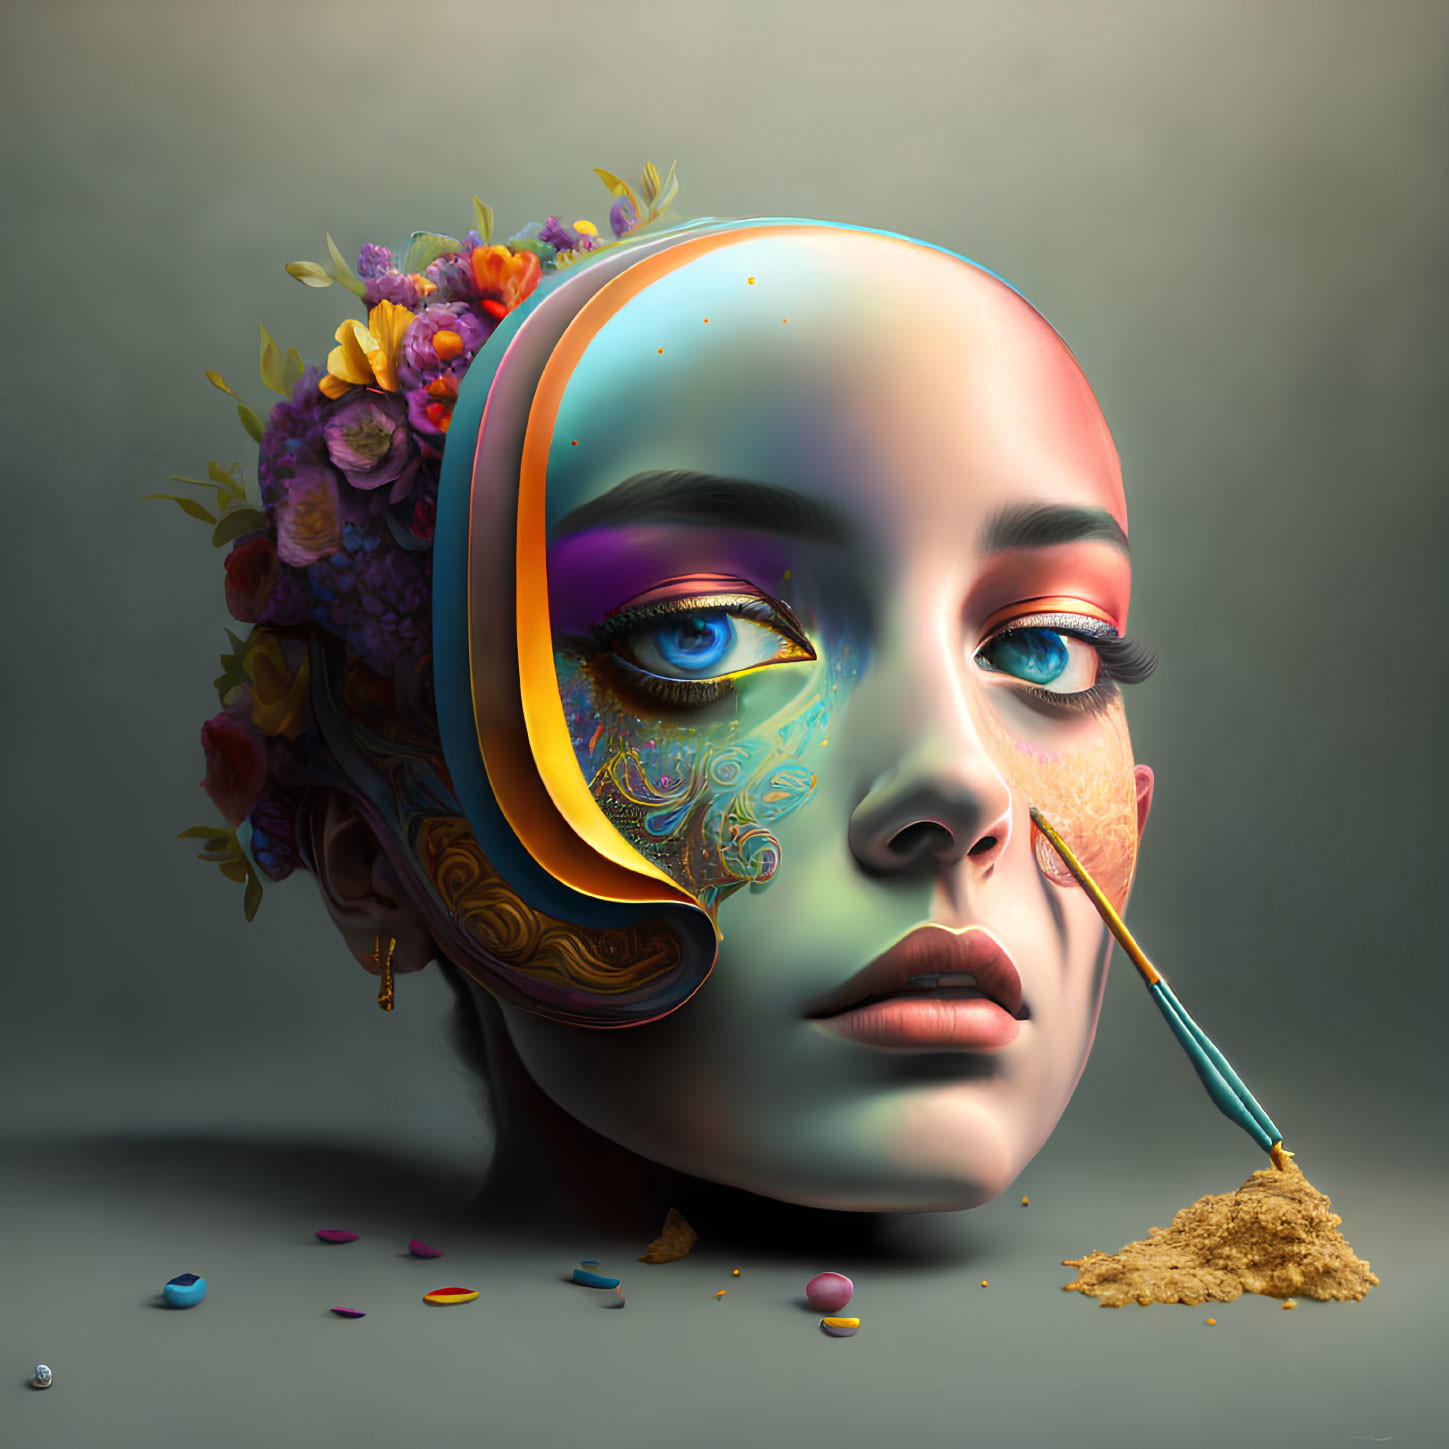 Colorful surreal portrait of a woman with painted face and flowers.